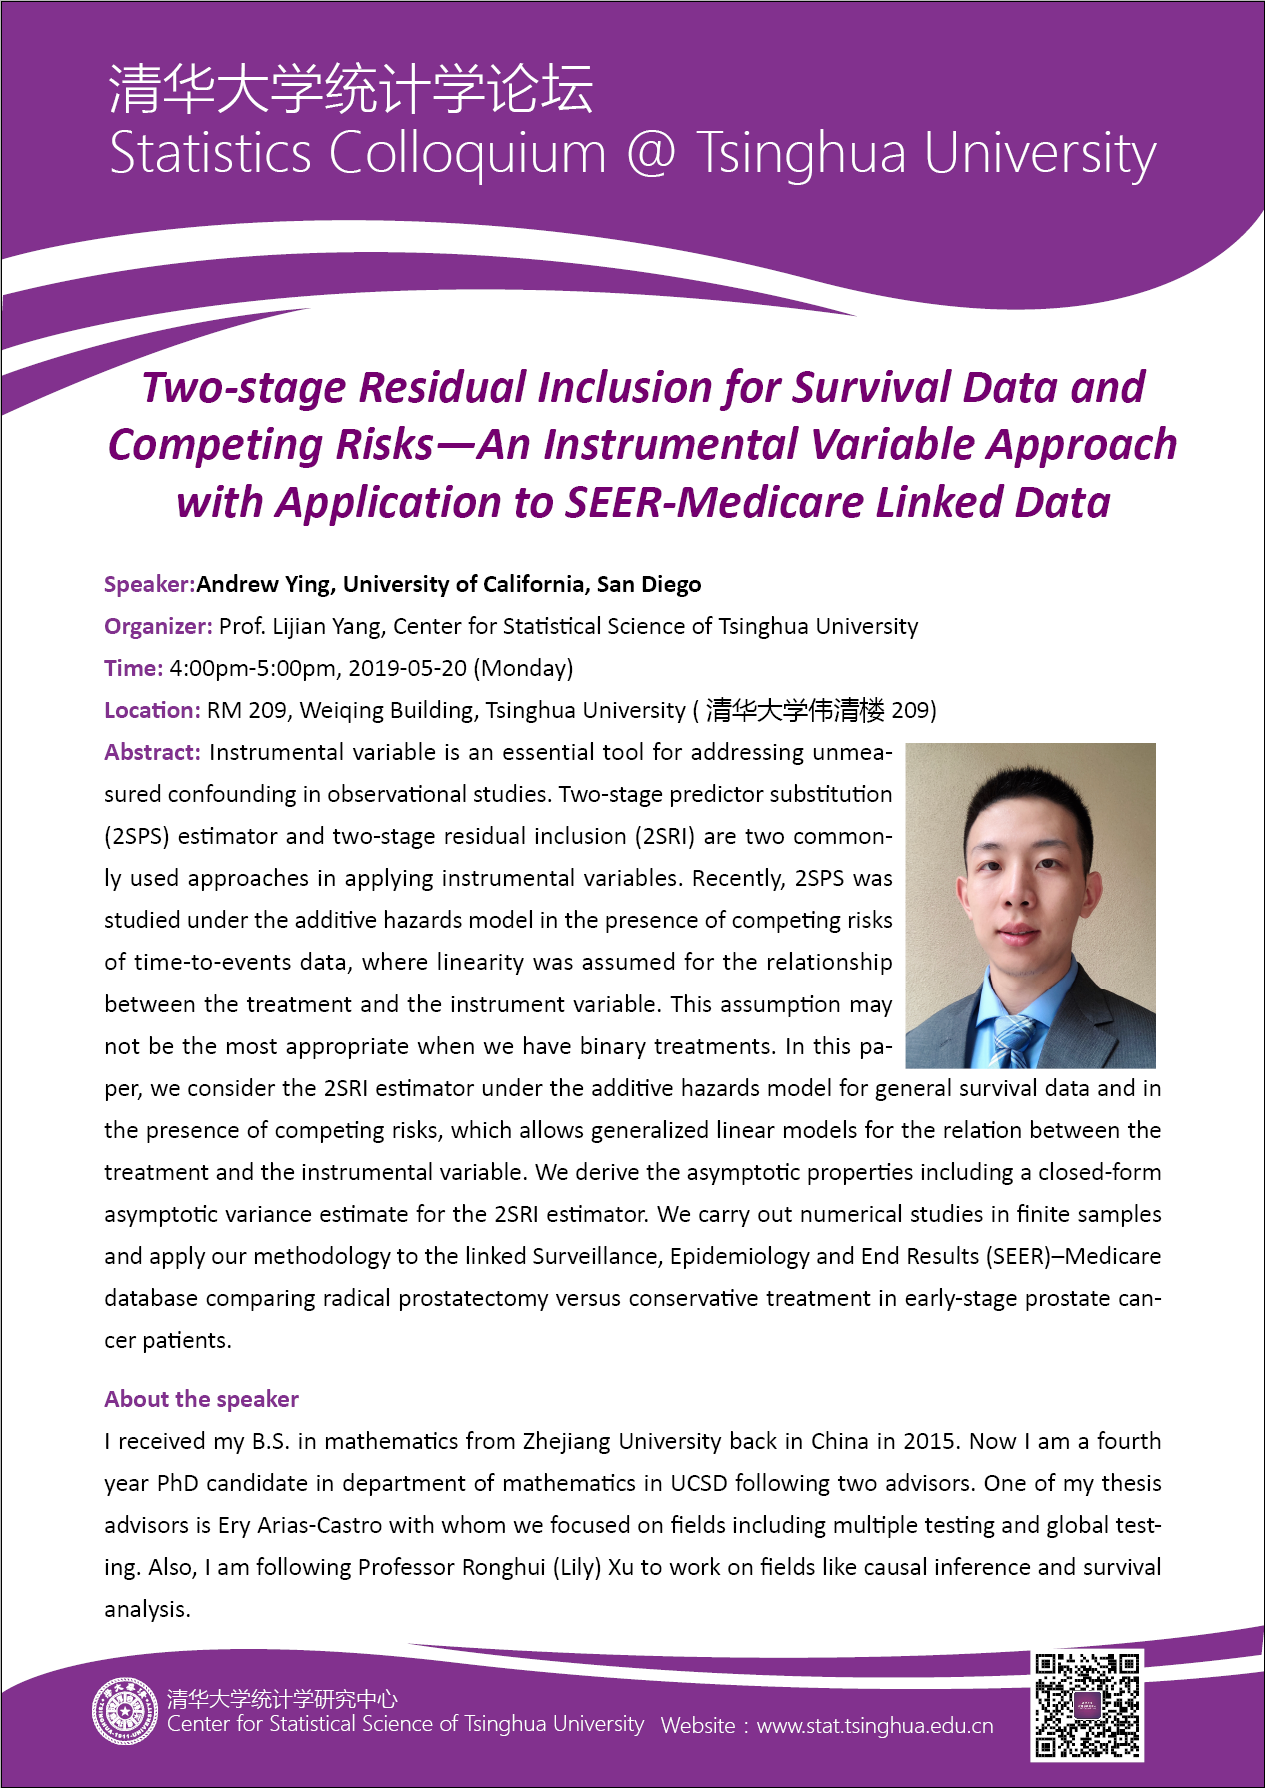 Two-stage Residual Inclusion for Survival Data and Competing Risks-An Instrumental Variable Approach with Application to SEER-Medicare Linked Data